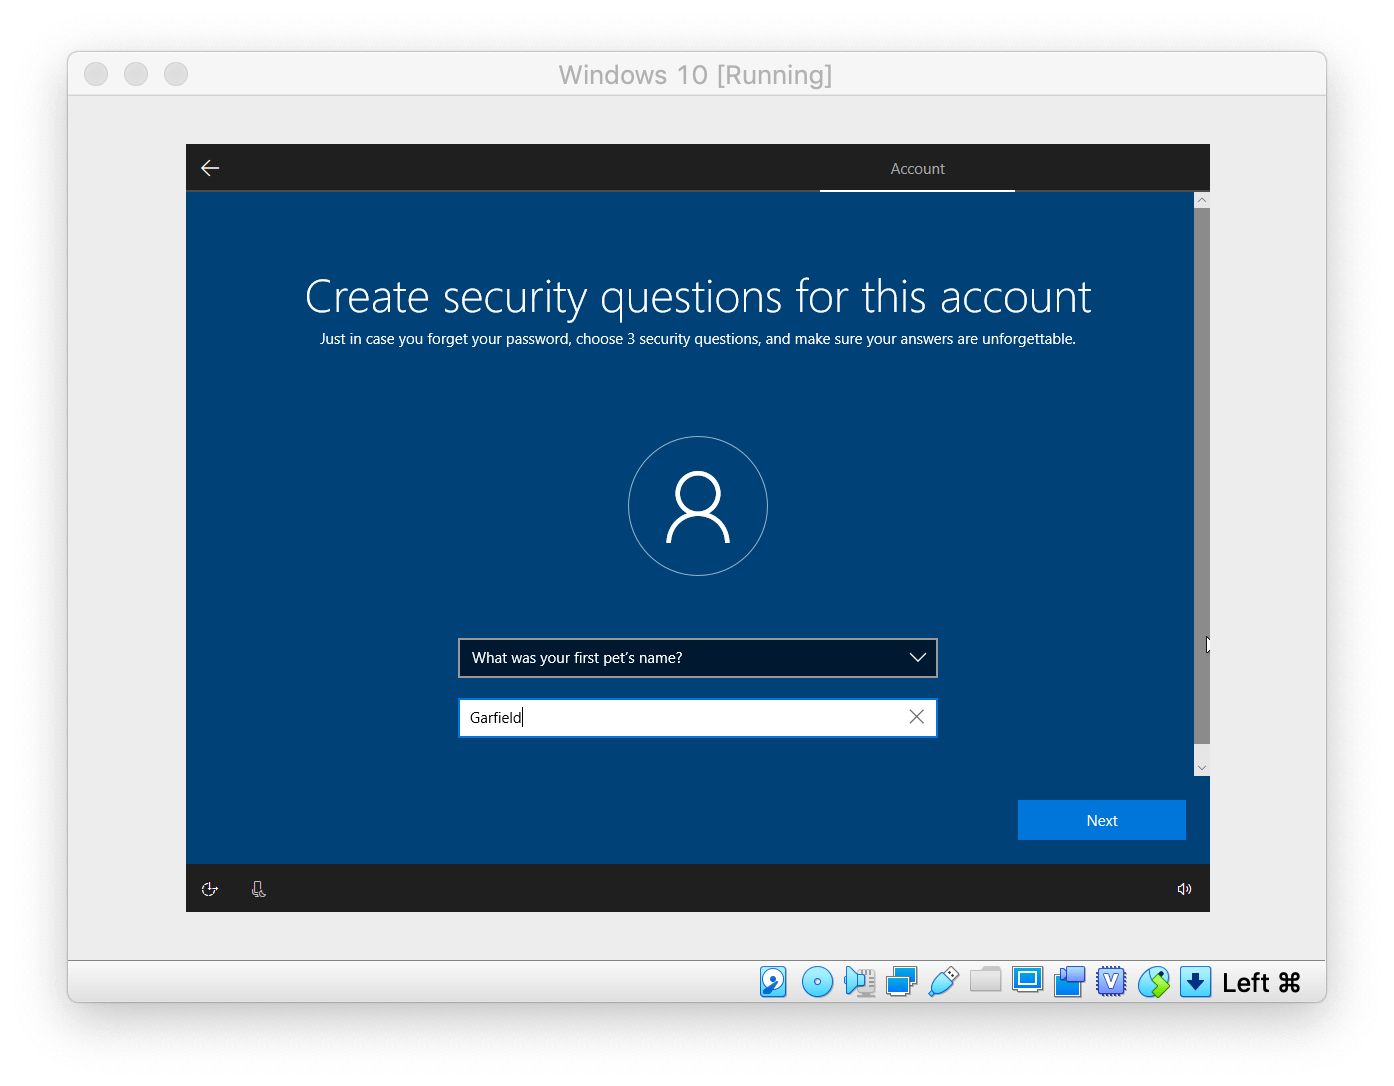 Windows Setup asking to create security questions